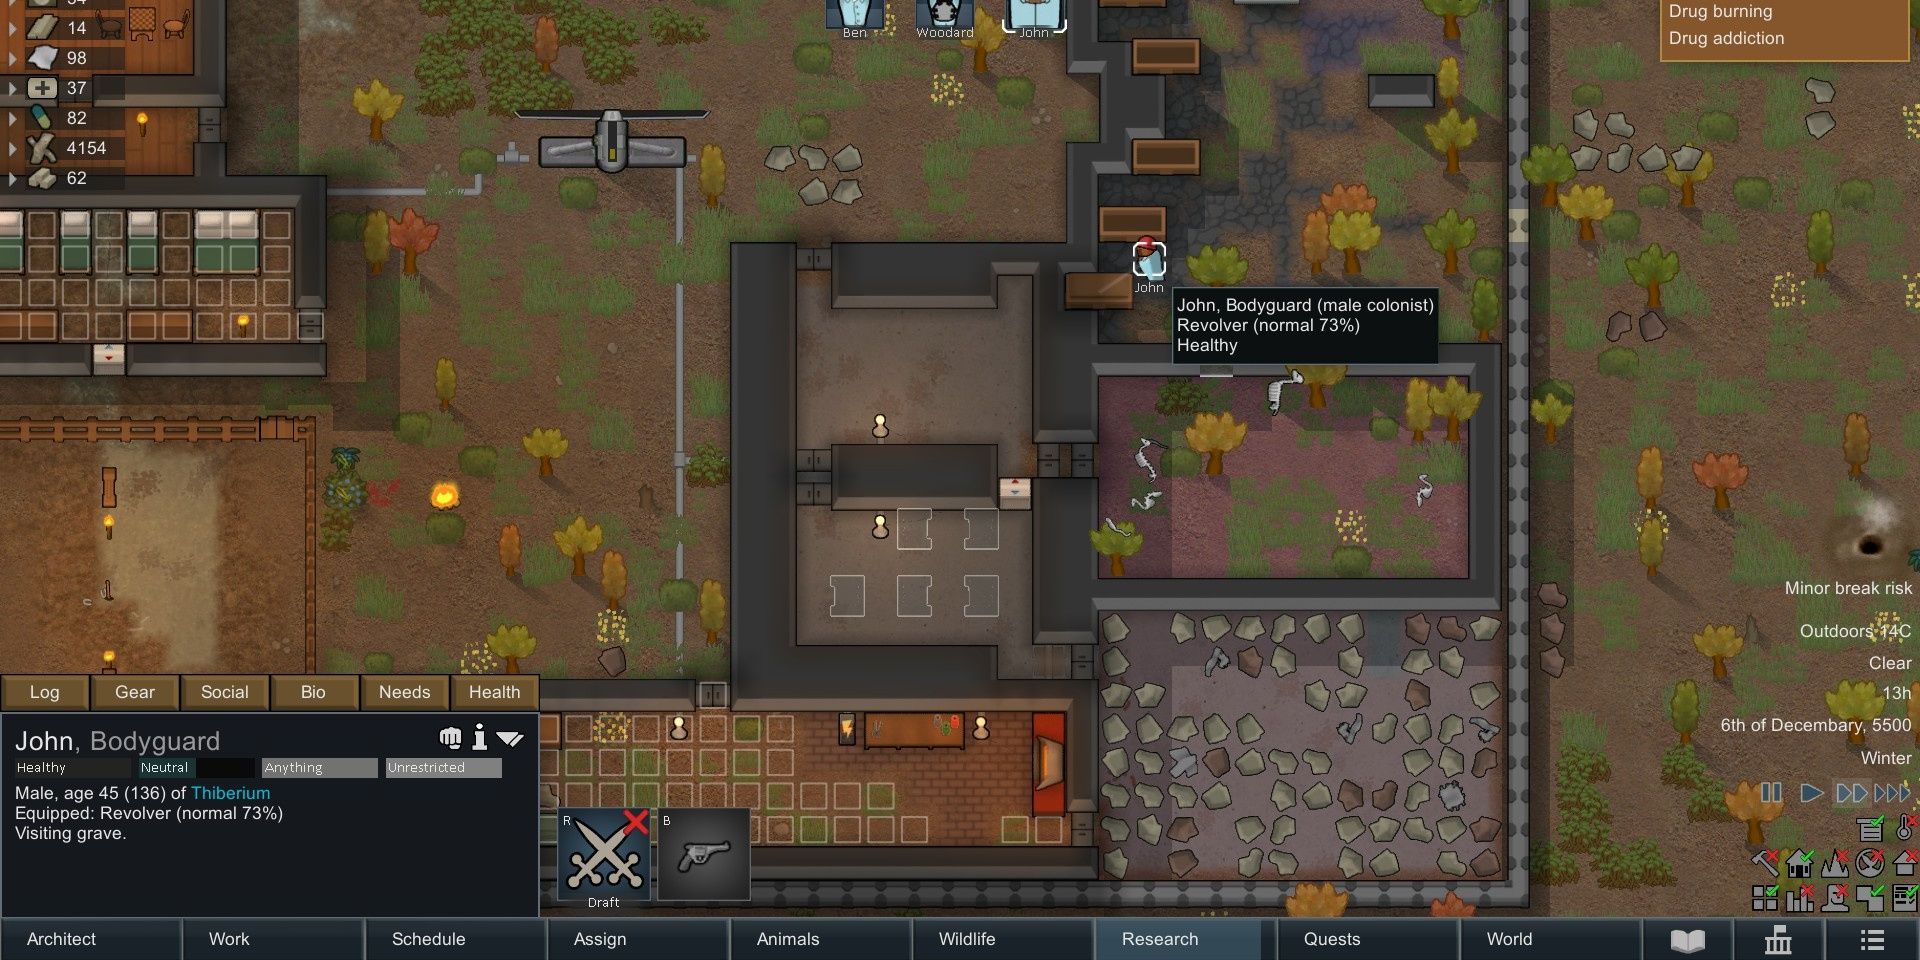 Another colonist grieving the loss of a friend